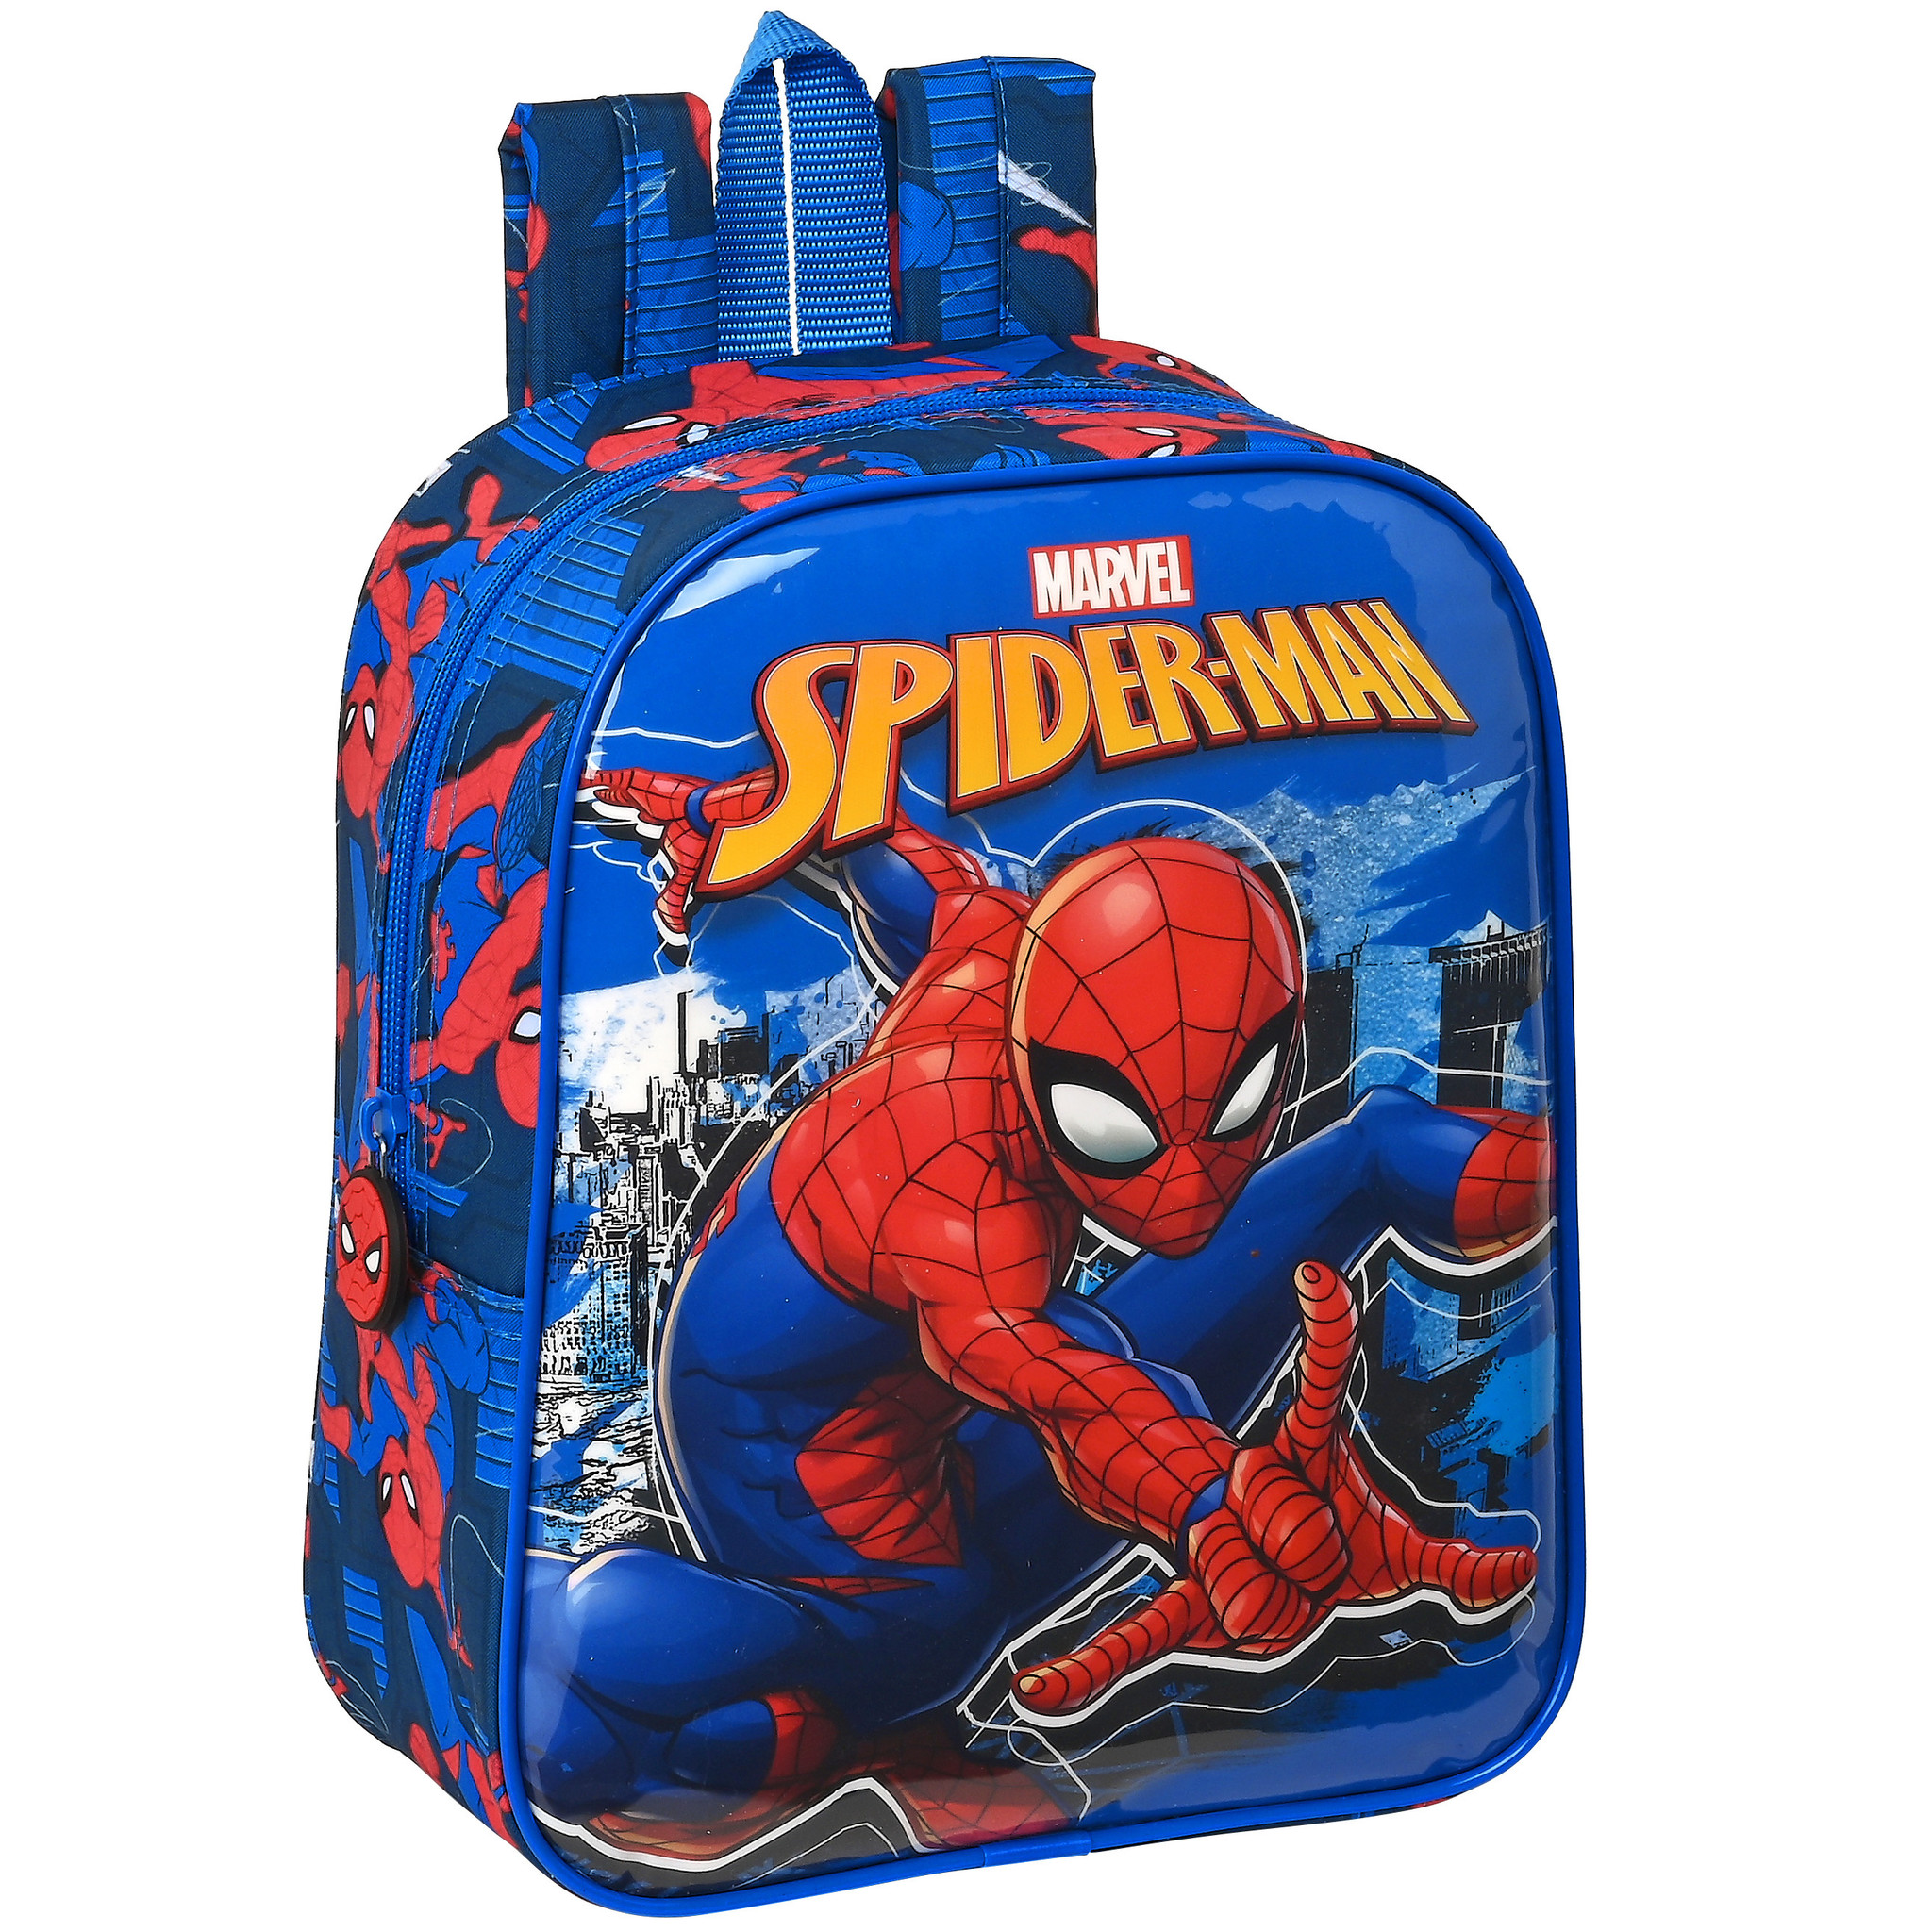 SpiderMan Toddler Backpack Great Power - 27 x 22 x 10 cm - Polyester -  